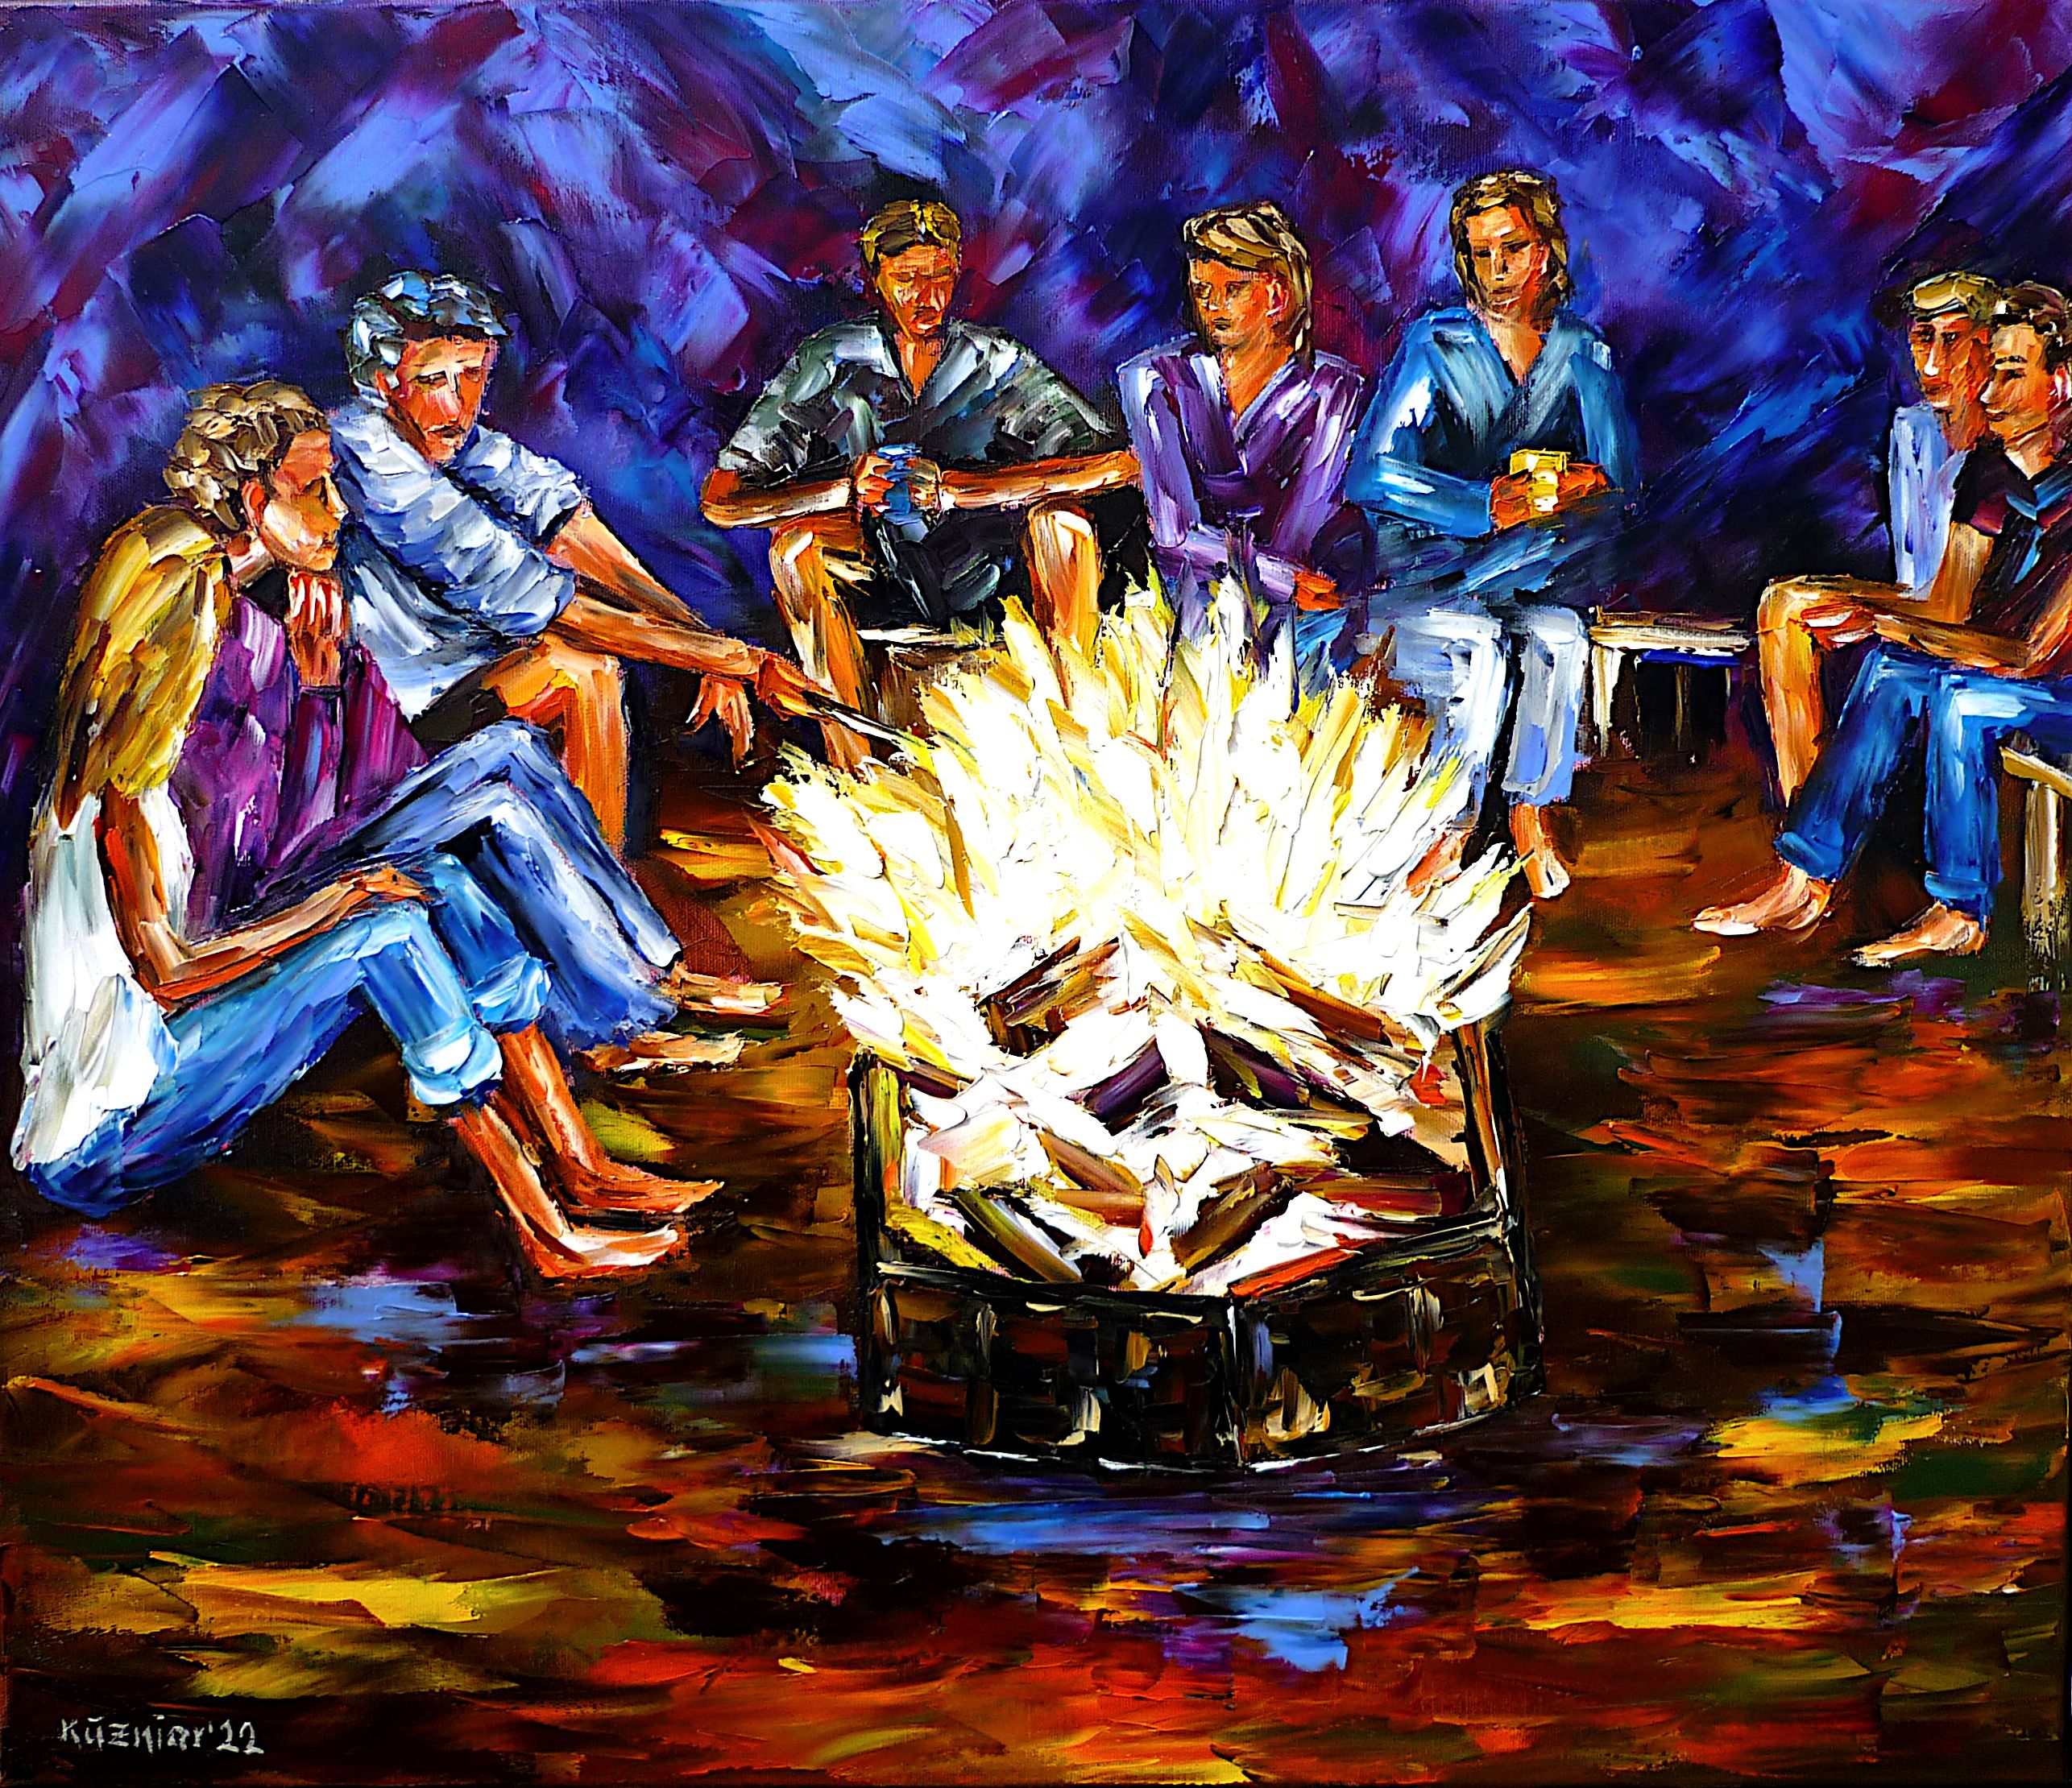 People by the campfire,campfire at night,sitting at the campfire,campfire romance,grilling at the campfire,people grilling,night romance,fire at night,camping,camping romance,family grilling,sitting together,family celebration,people in summer,summer night,summer barbecue,summer feelings,summertime,summer painting,summer picture,beautiful time,peaceful,people in the green,people outdoors,people in nature,romantic scene,romantic night,romantic picture,palette knife oil painting,modern art,modern painting,impressionism,expressionism,abstract painting,lively colors,colorful painting,bright colors,light reflections,impasto painting,figurative